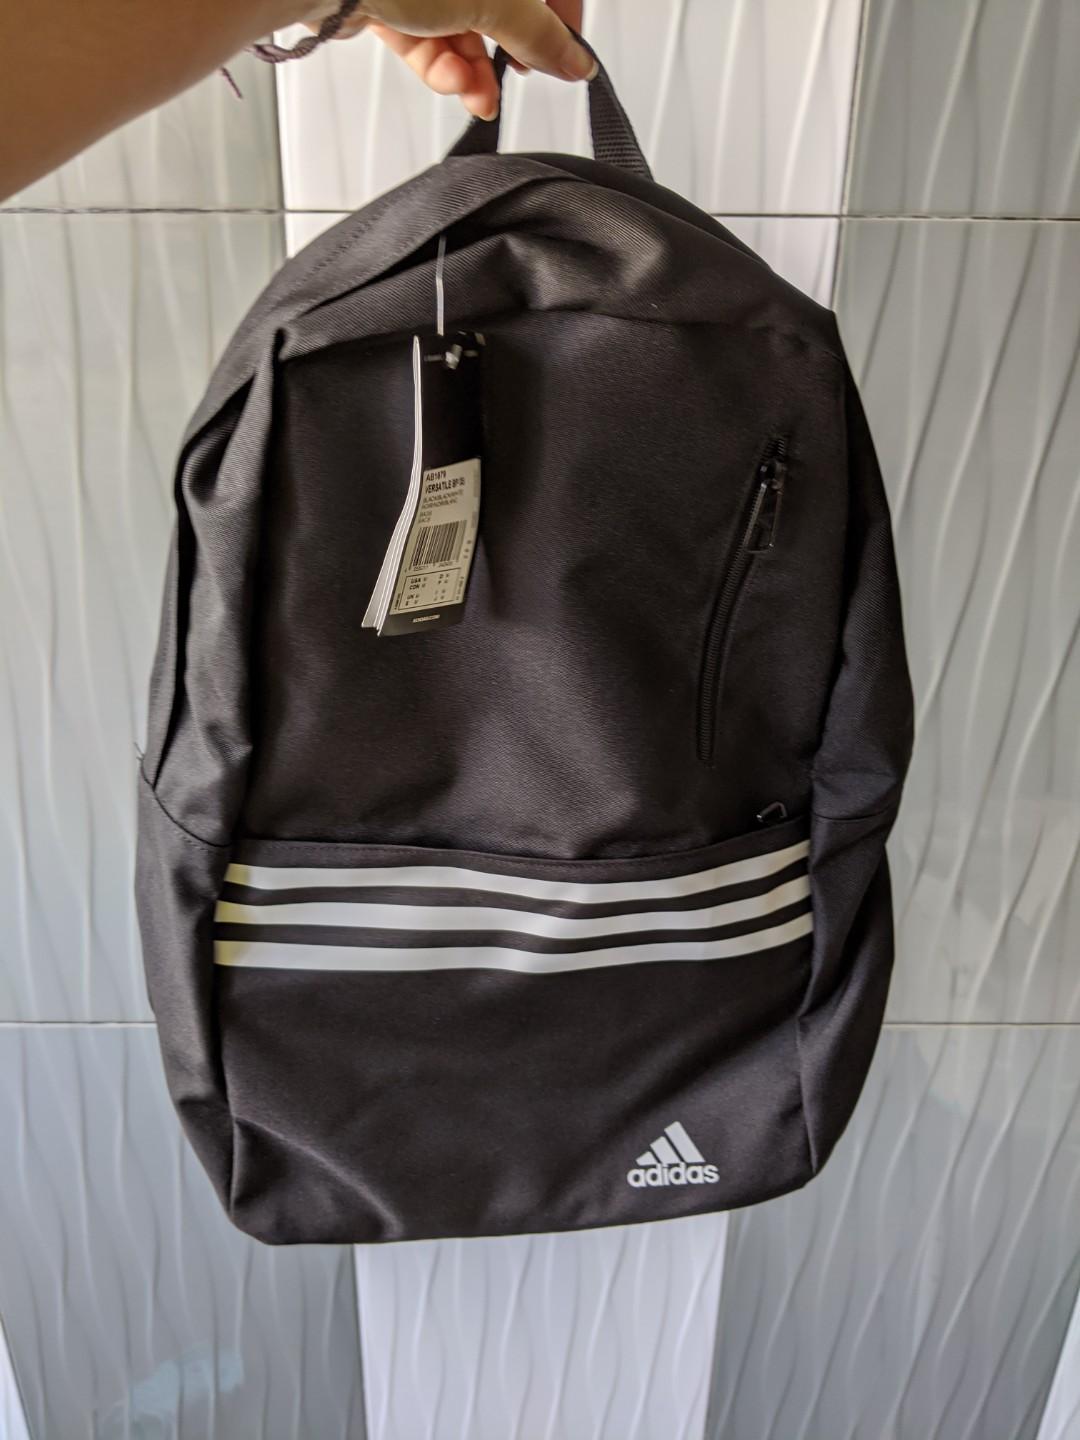 Adidas CLSC BOS BP GFX HI5994 NOT SPORTS SPECIFIC black BACKPACK for Women size  NS price in Egypt | Amazon Egypt | kanbkam